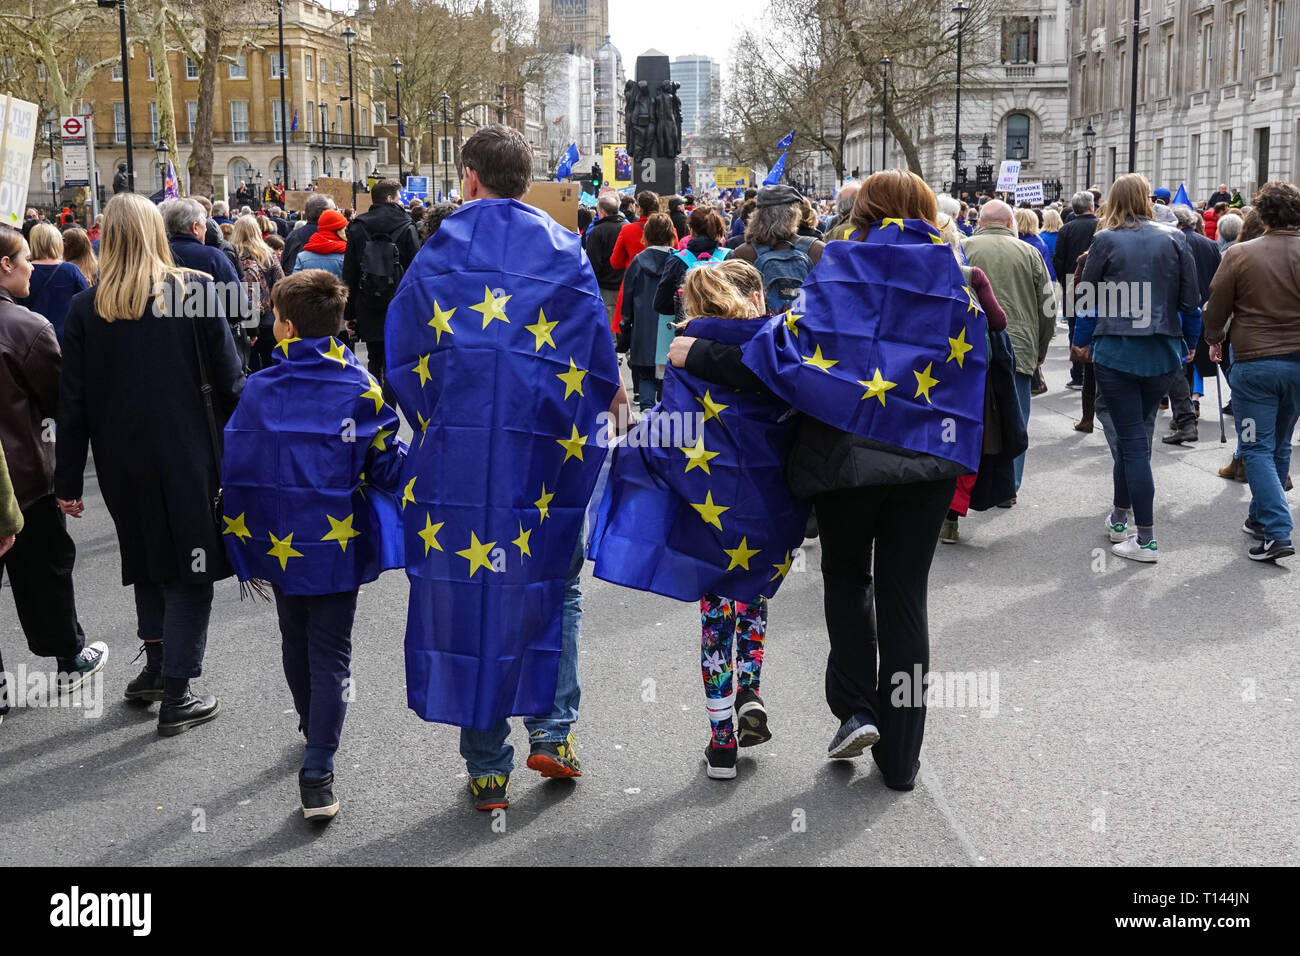 London, UK. 23rd March, 2019. Family with EU flags join the People's Vote March against Brexit Stock Photo